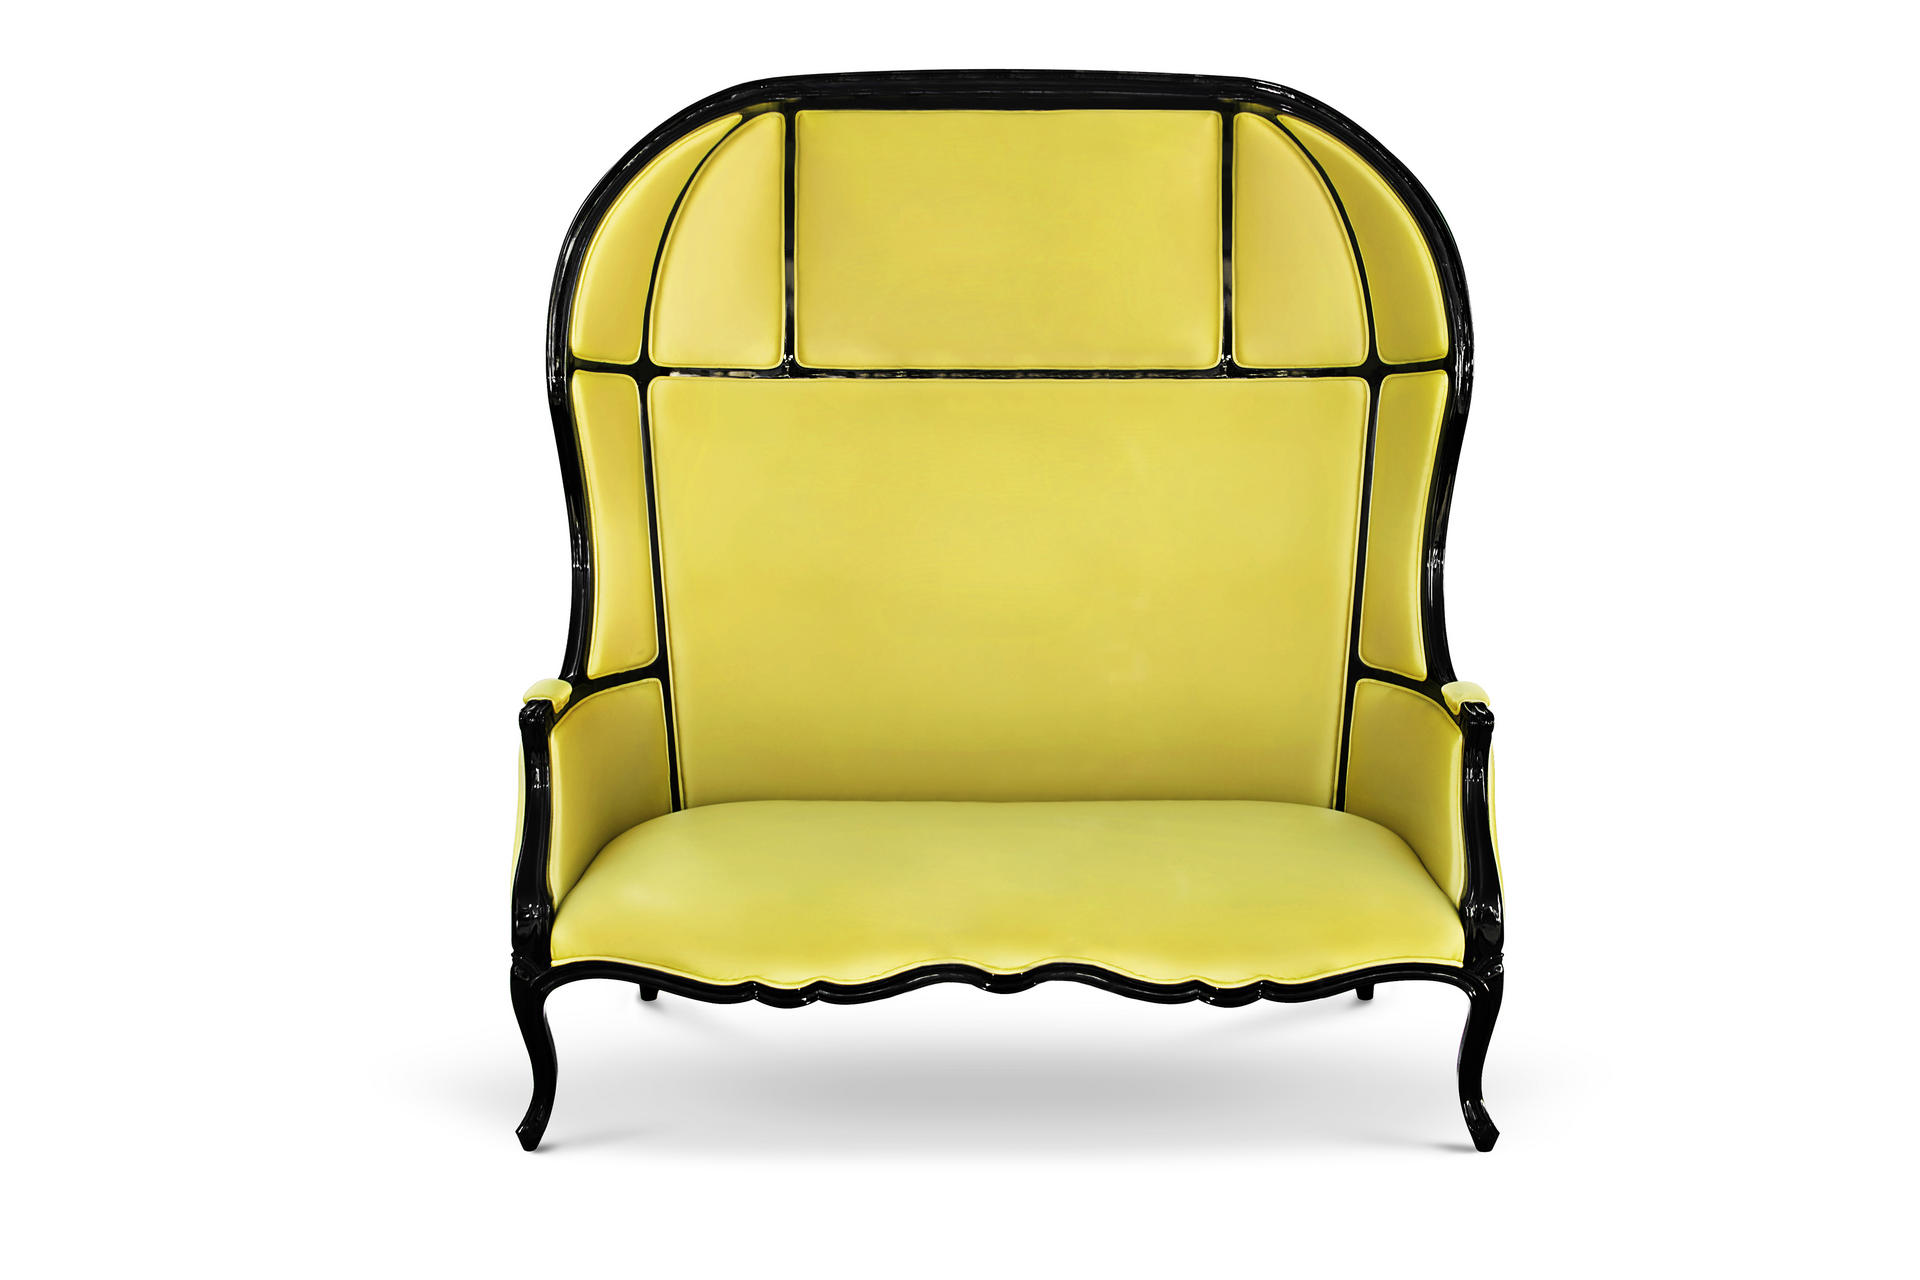 BrabbuThe Namib sofa in yellow will add a pop of sunshine to any room. Price on request